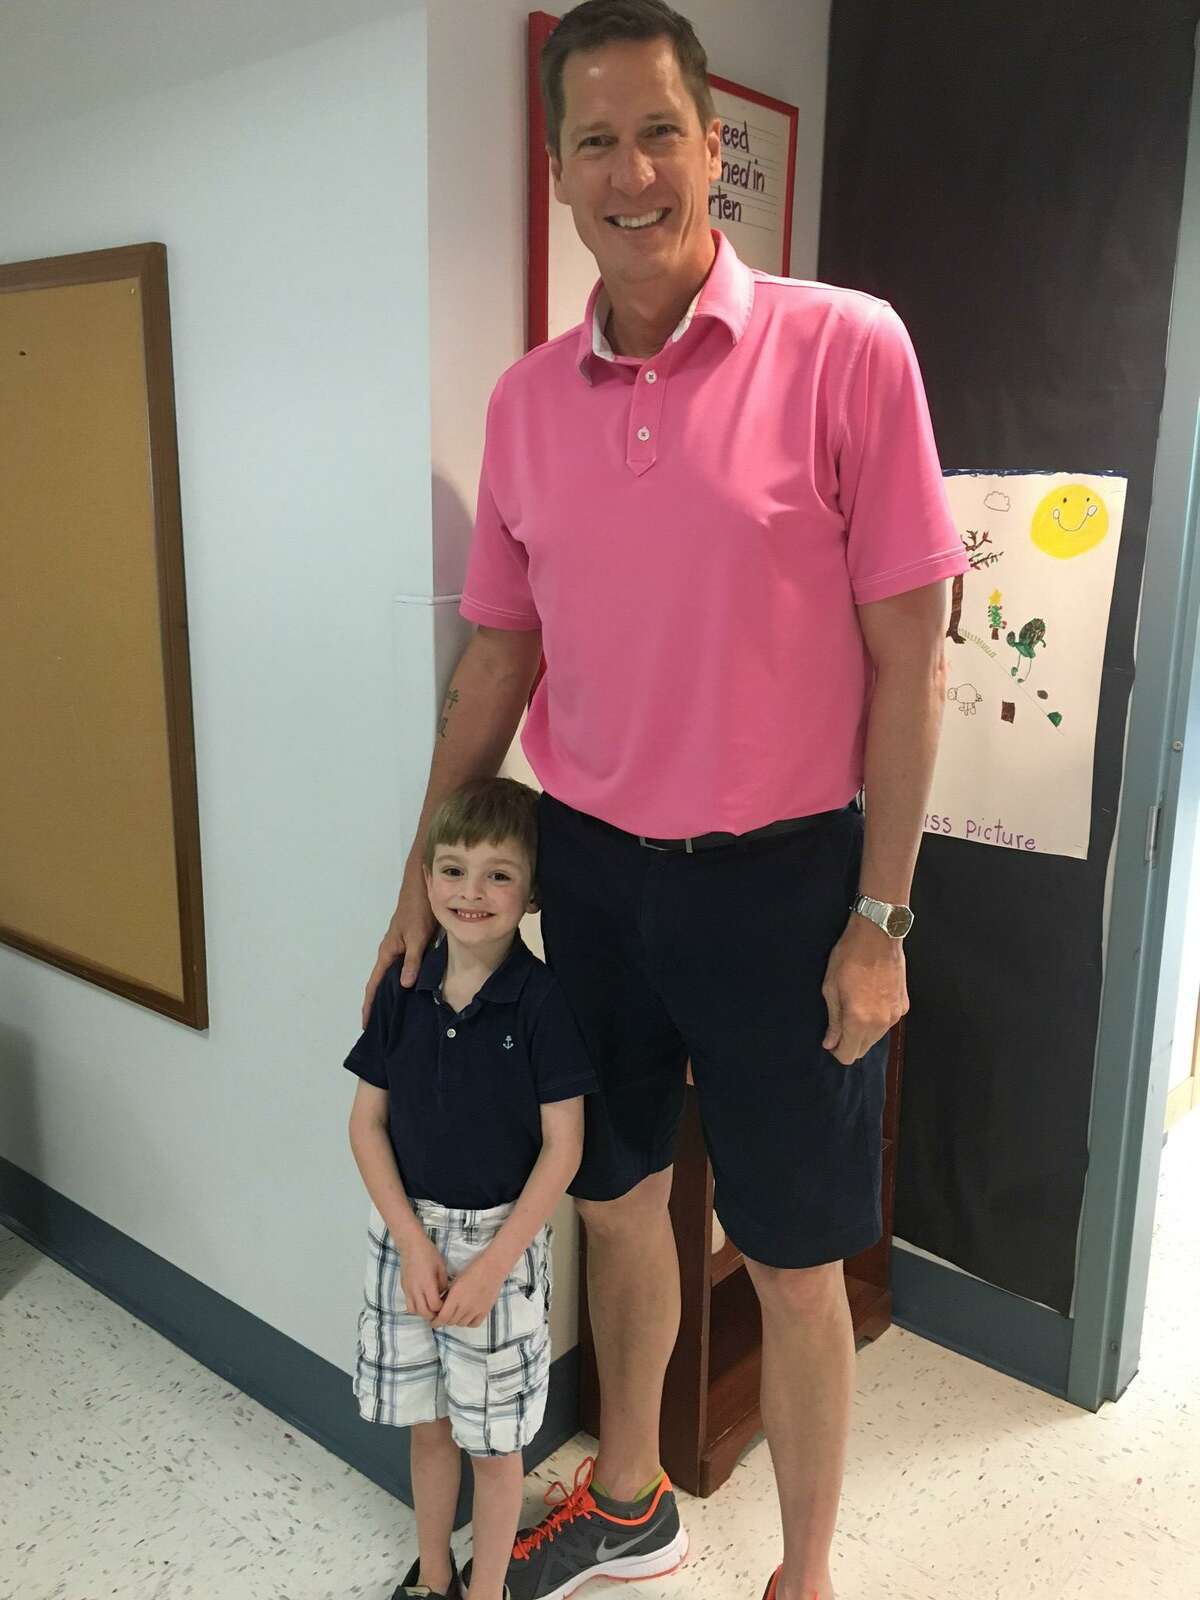 Gavin McCollom was in John “Jack” Reynolds’ kindergarten class from 2015 to 2016. His goal was to grow to the height of his teacher’s belt by the end of the school year.